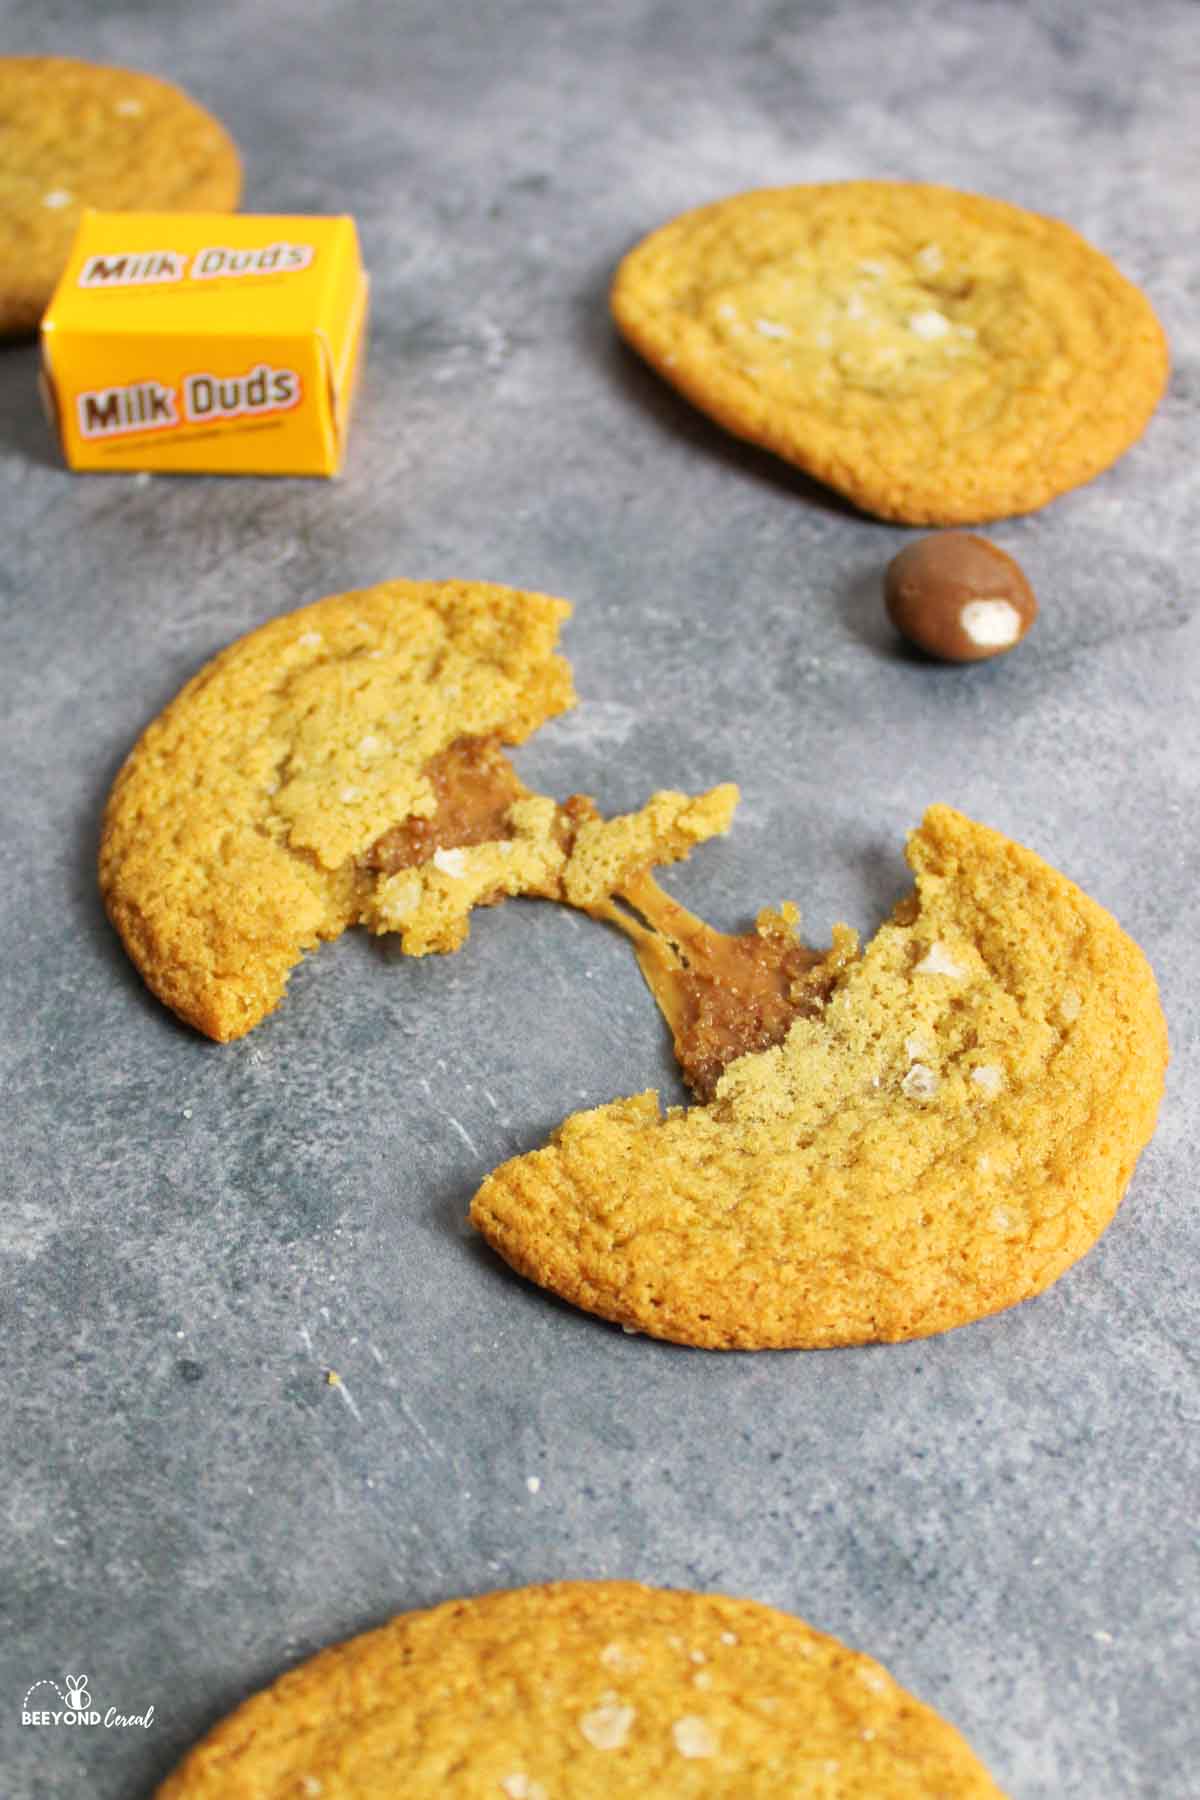 a broken milk dud cookie to show the chewy caramel inside